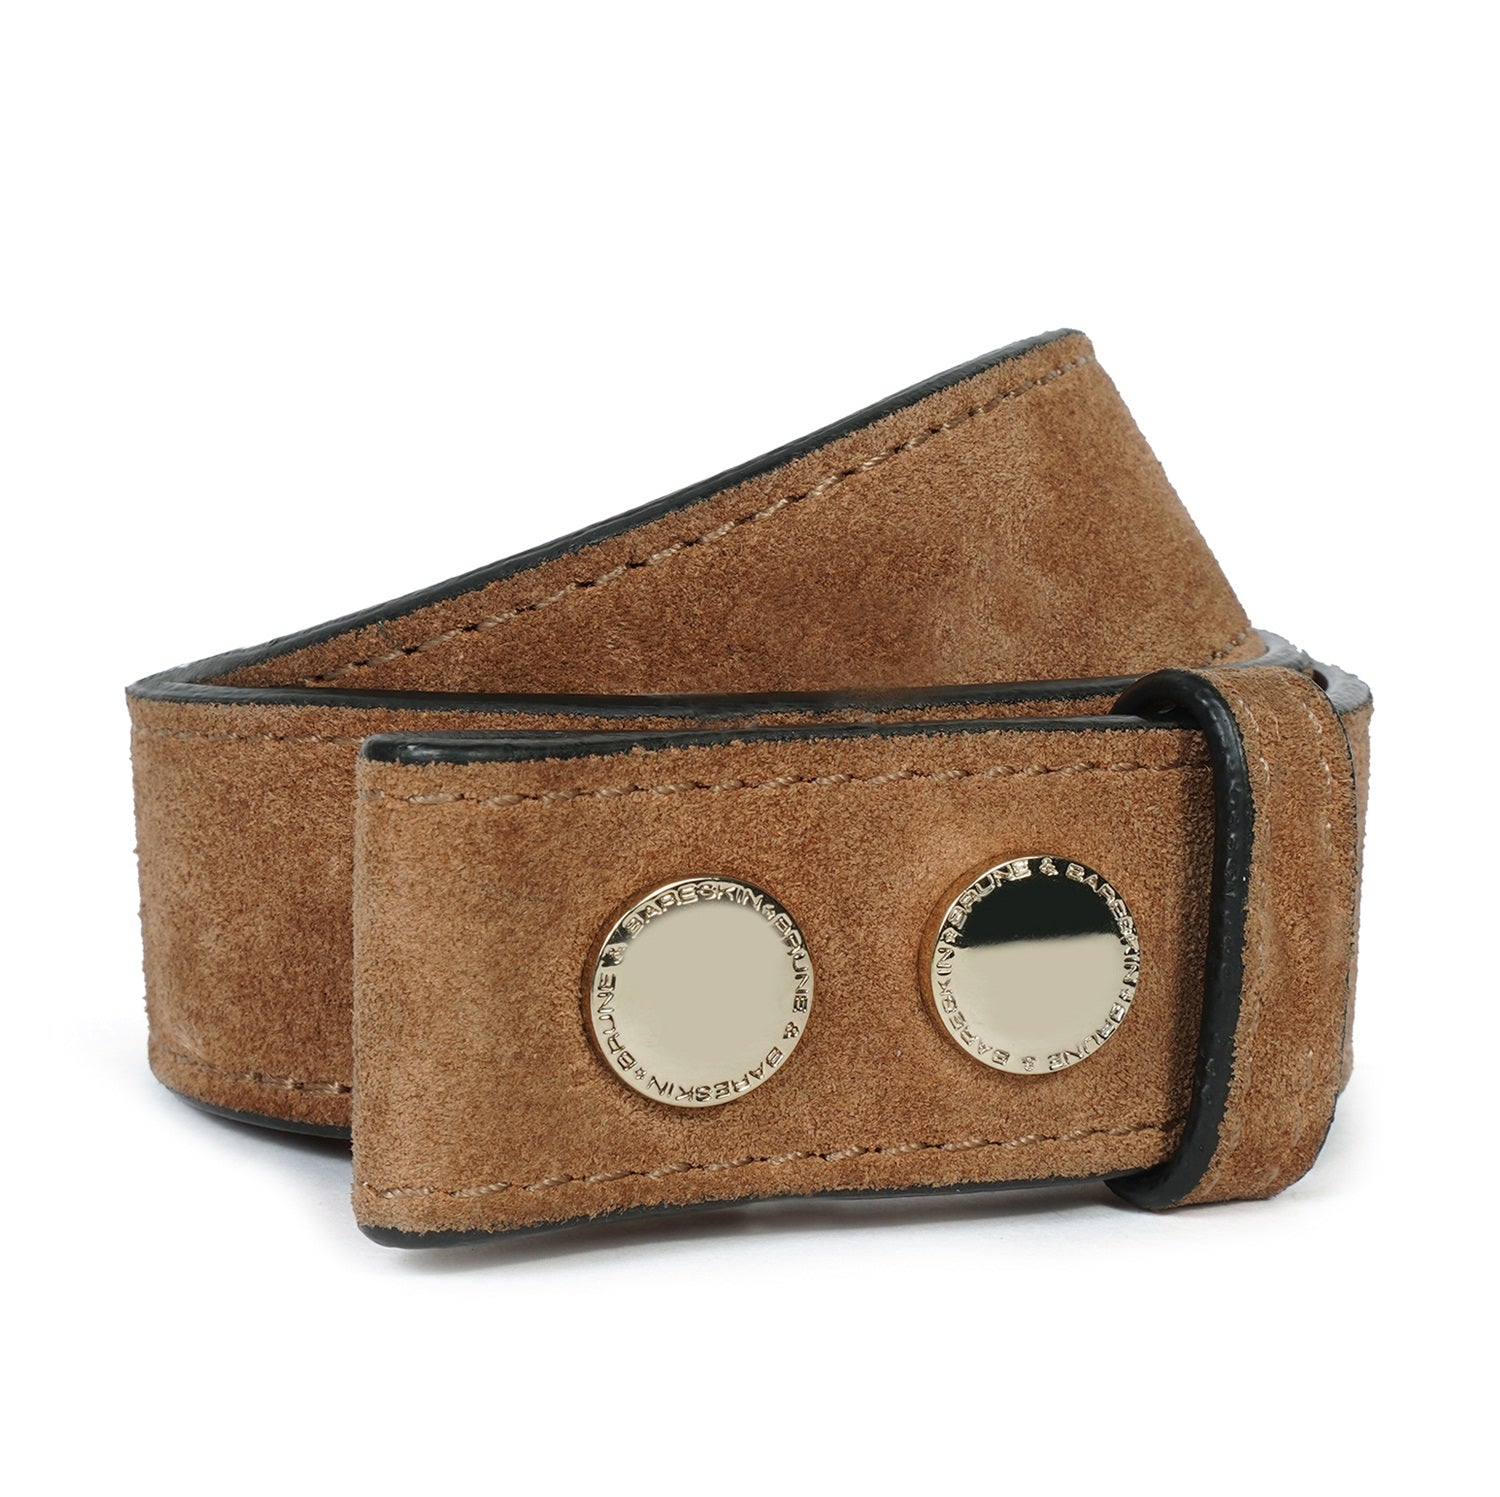 Removable Suede Leather Belt Strap in Tan Color